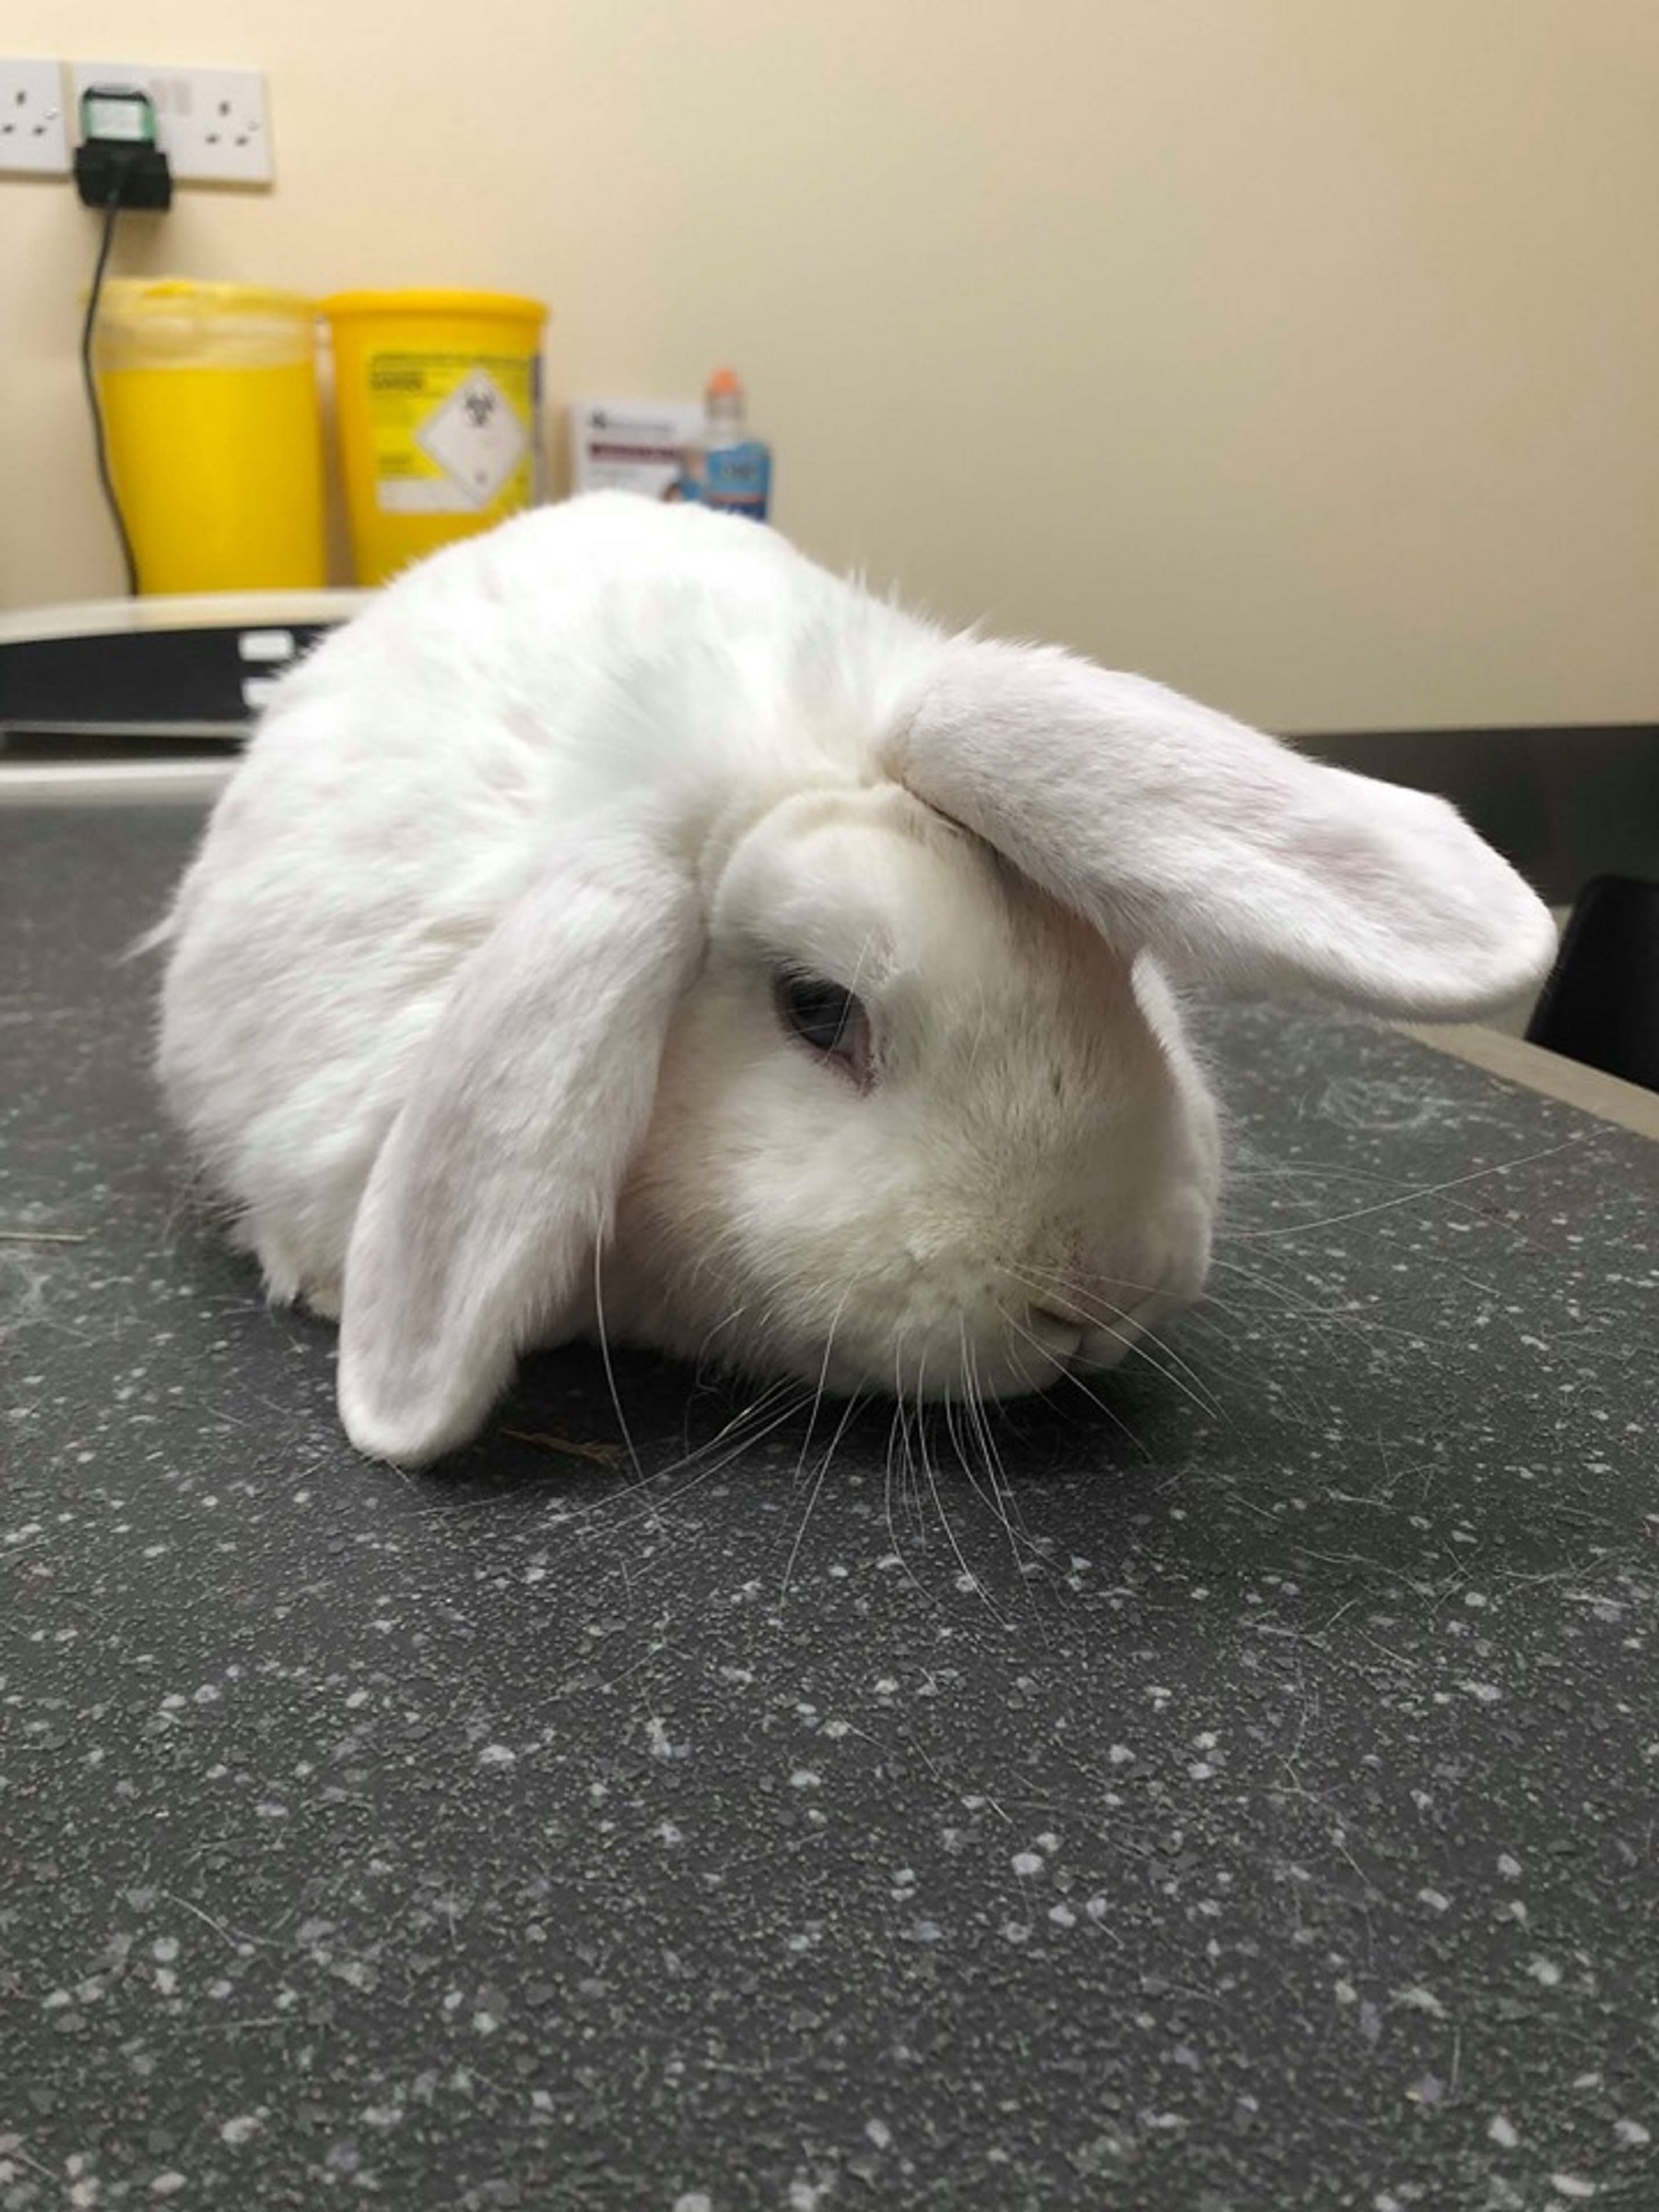 Wonky the rabbit, who is looking for a home before Christmas